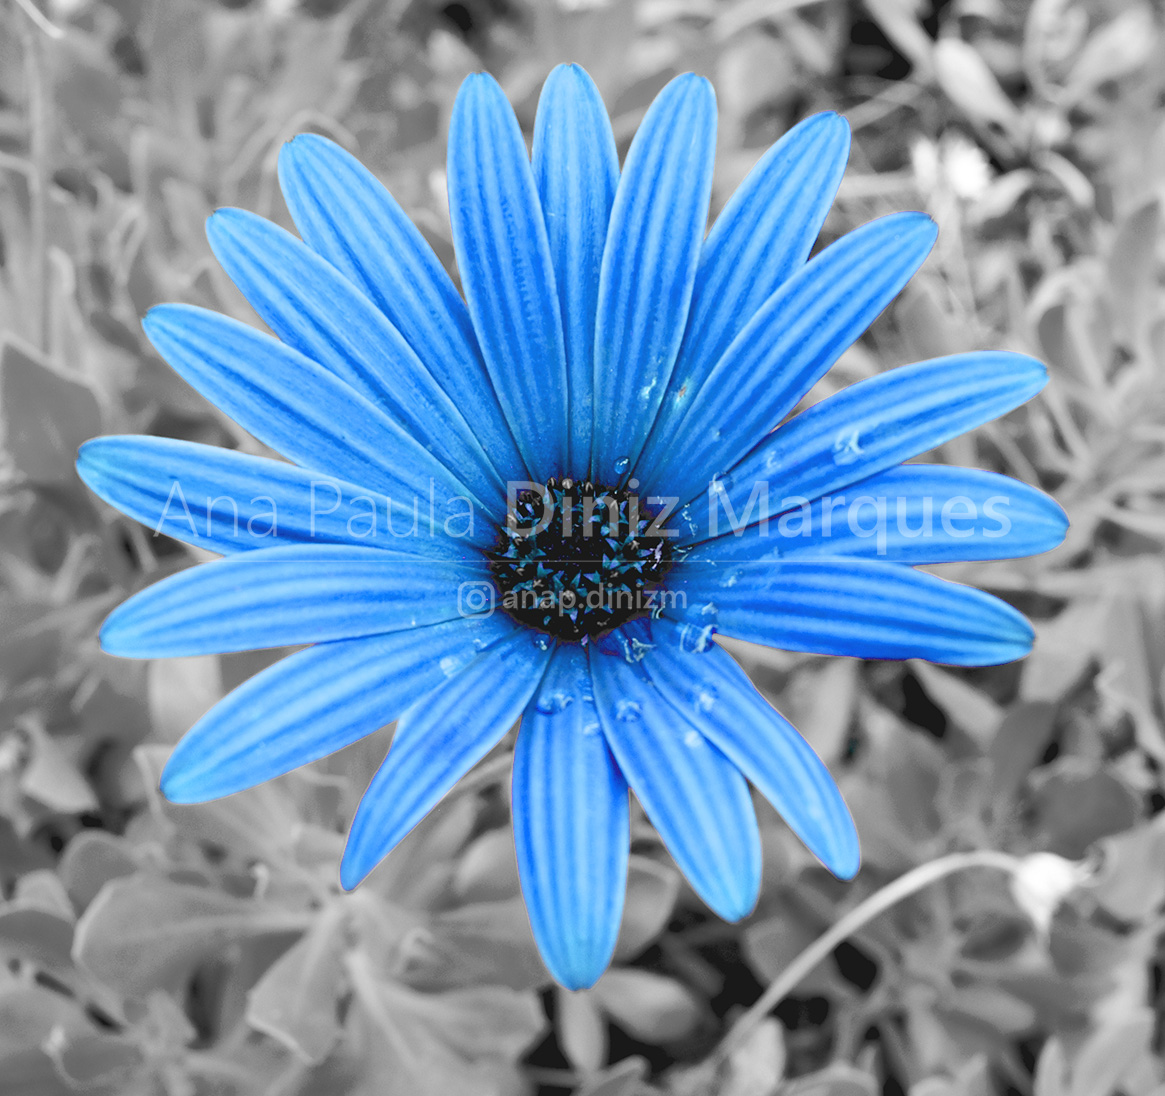 Flower blue and backgroung unsaturated 